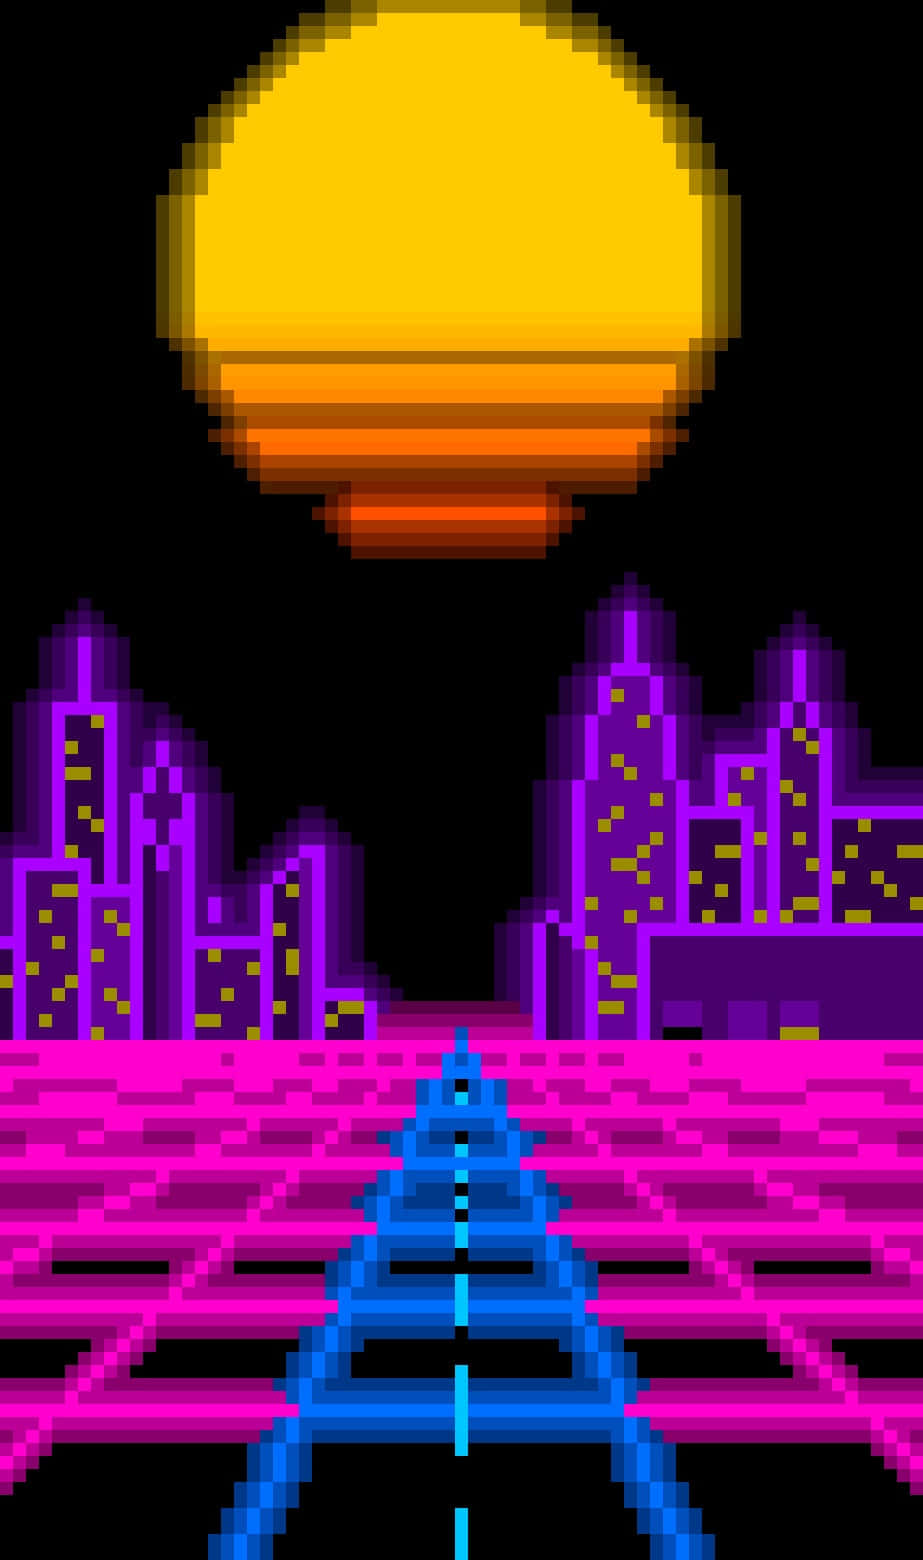 A Pixelated Image Of A City With A Neon Skyline Wallpaper